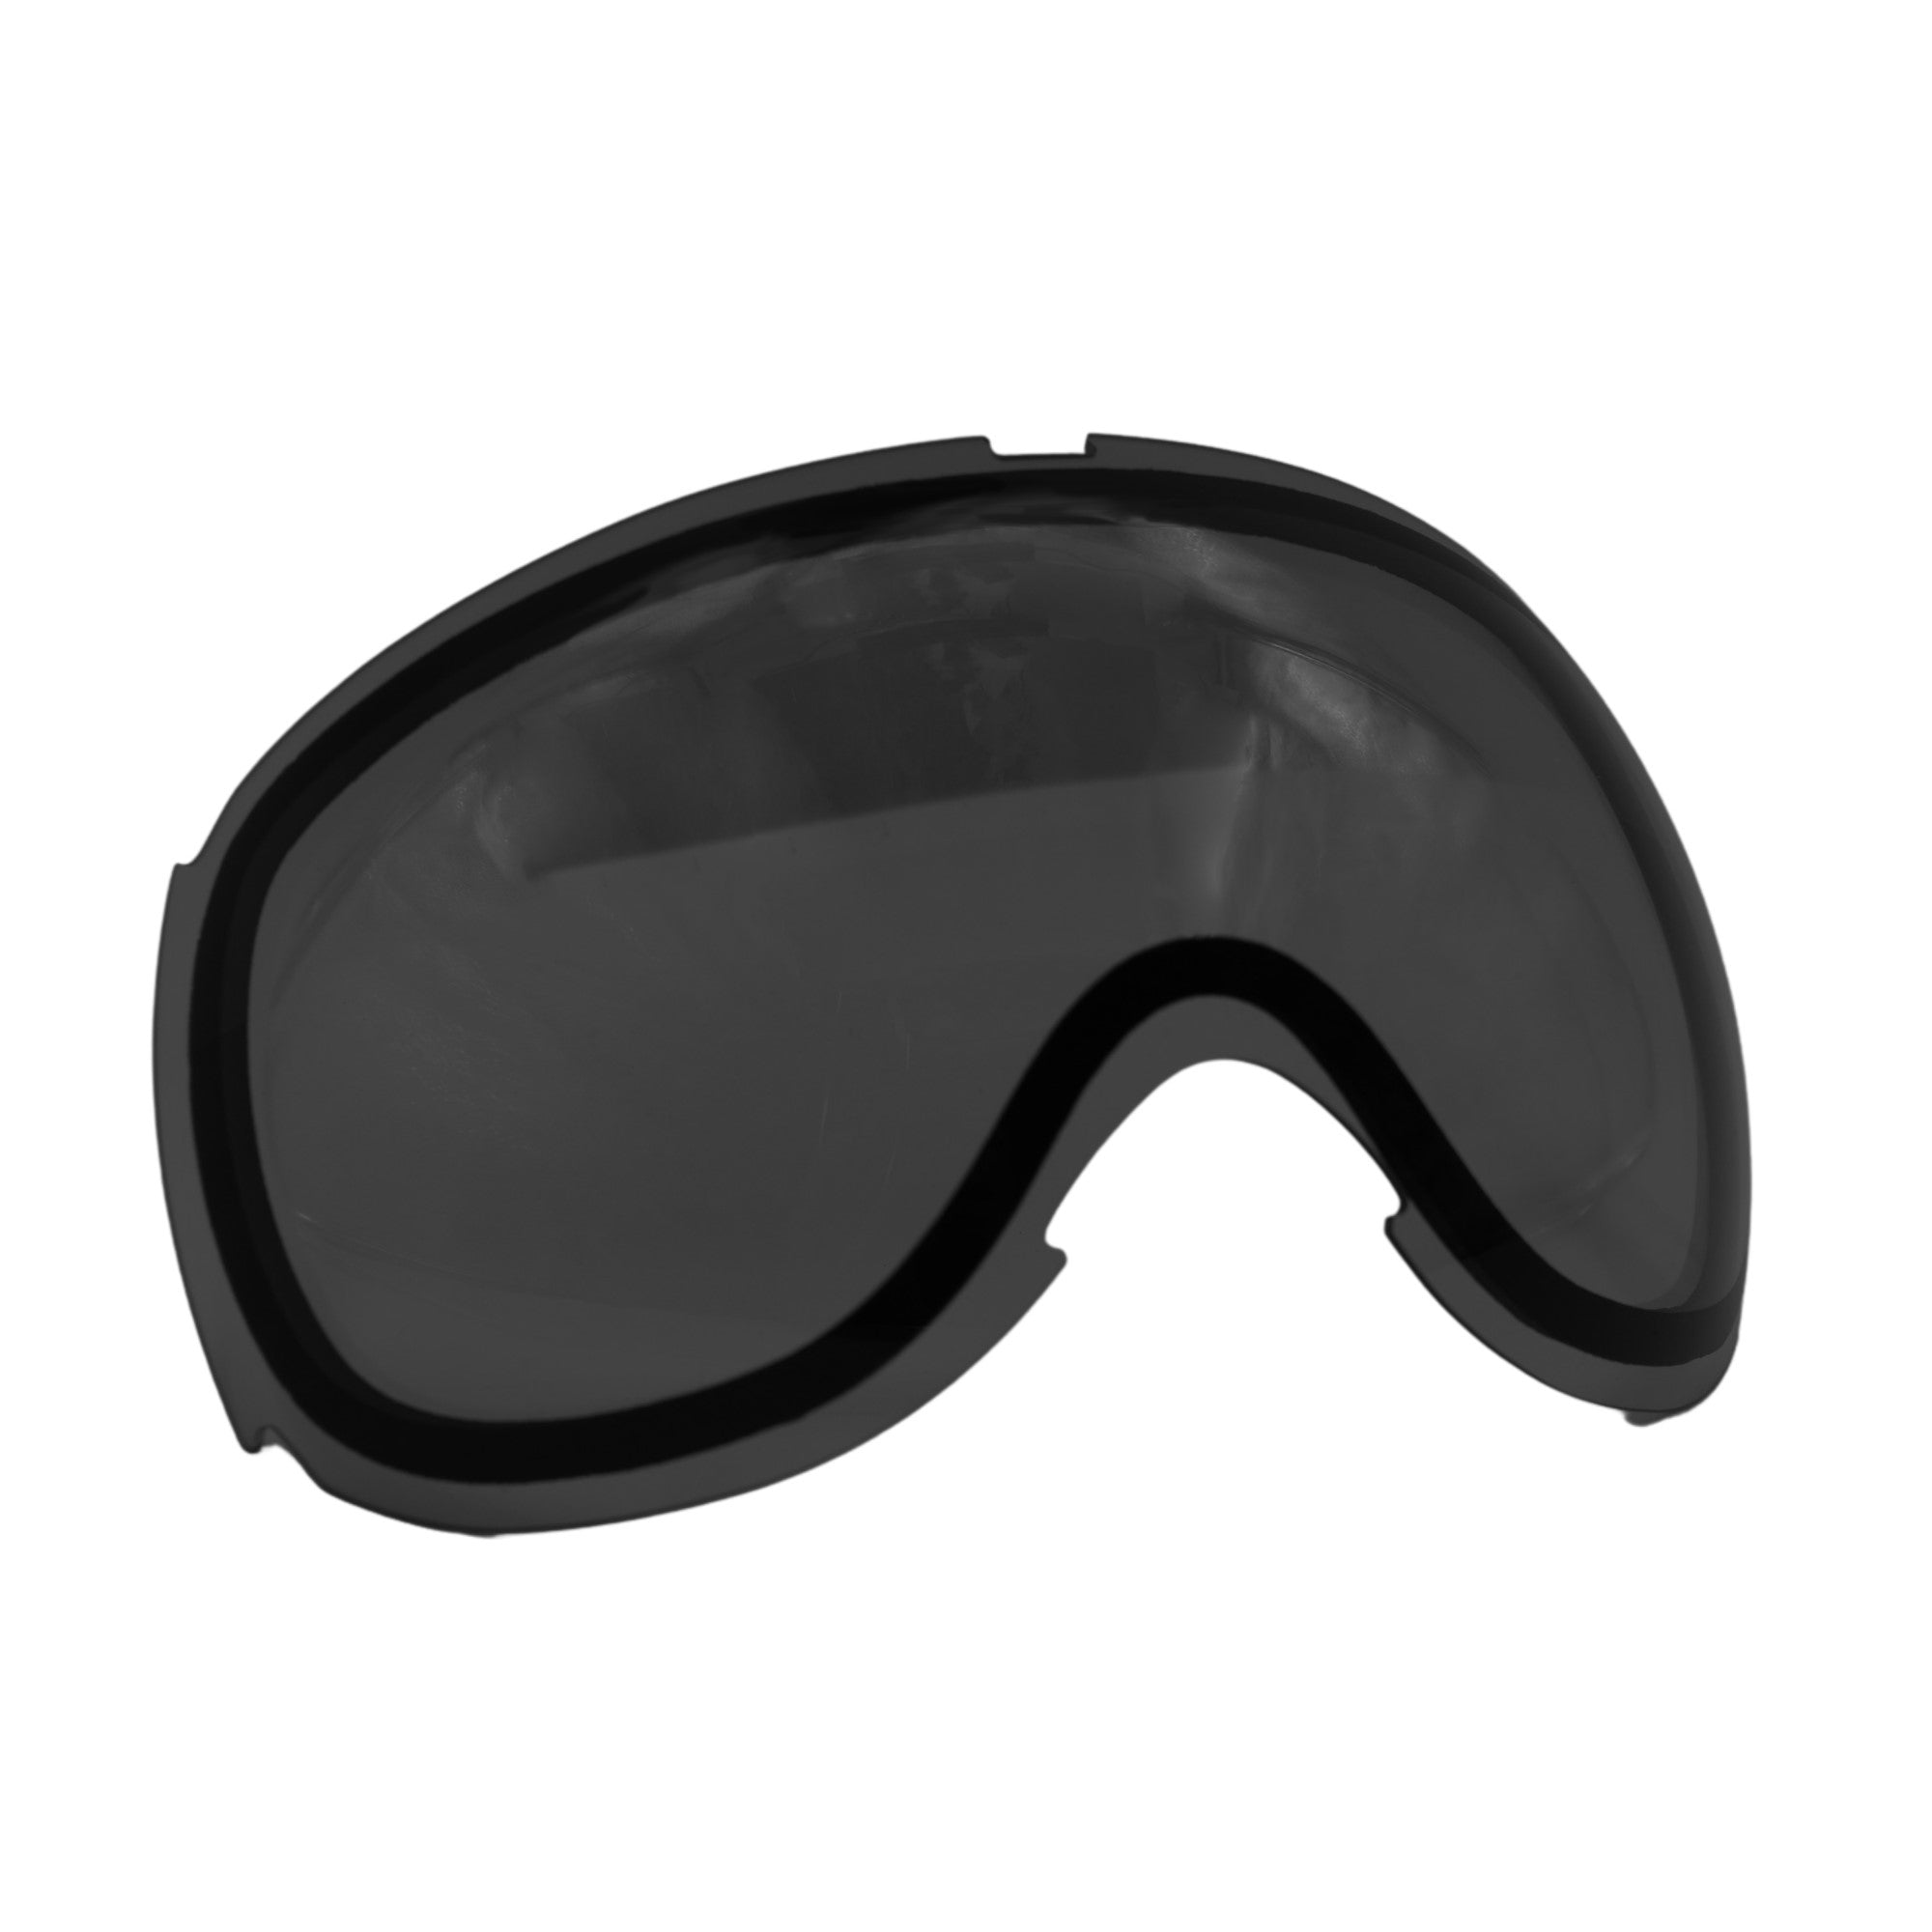 Sunny Day Gray Lens for REKKIE Snow Goggles